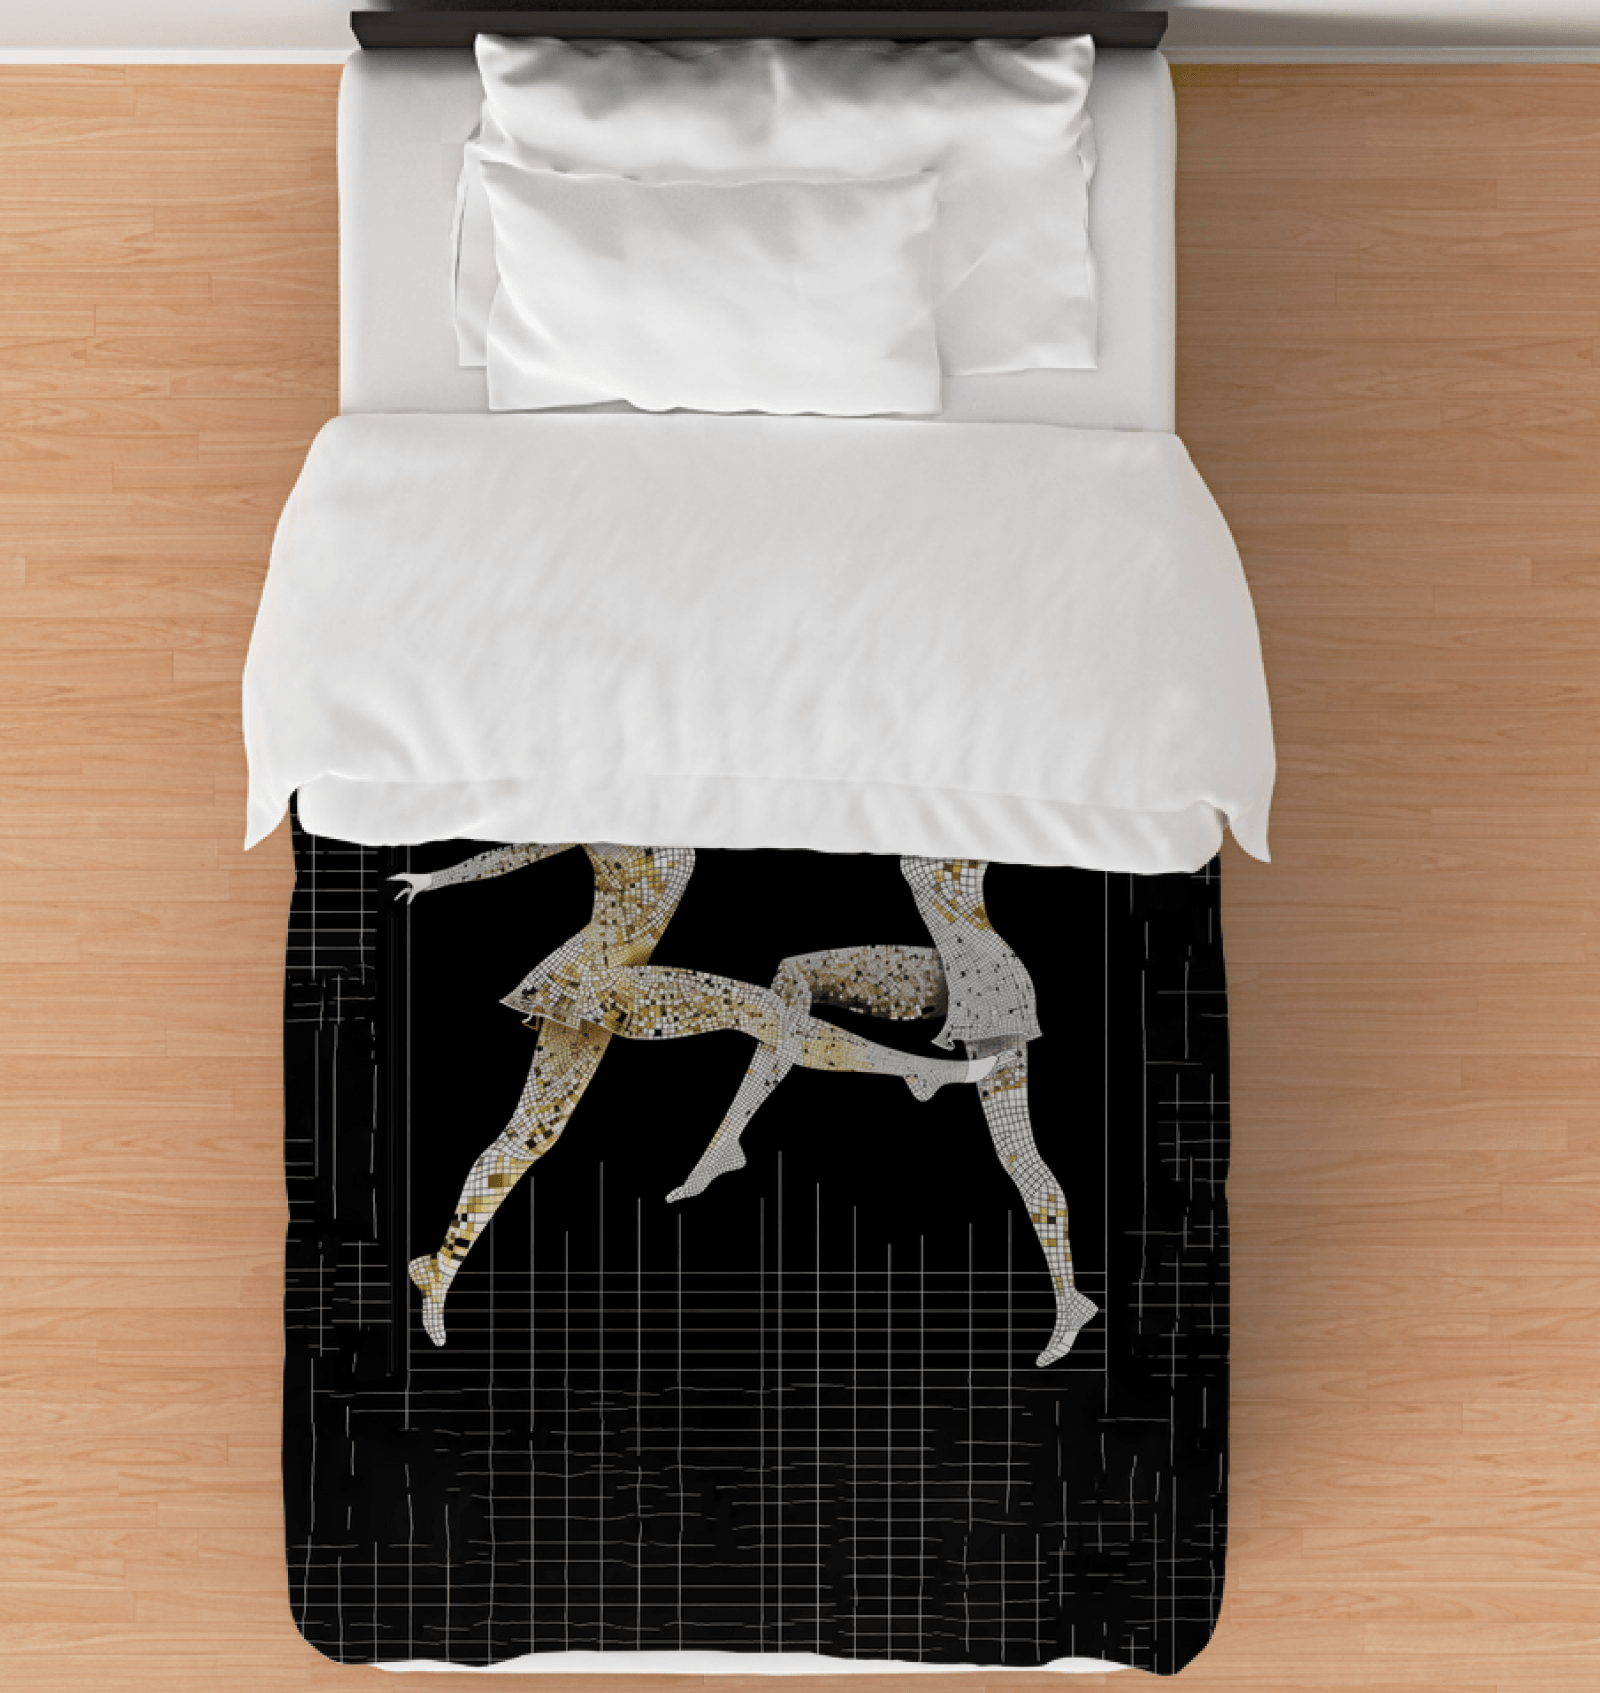 Graceful ballet dancer silhouette design on a soft duvet cover, perfect for a serene bedroom ambiance.